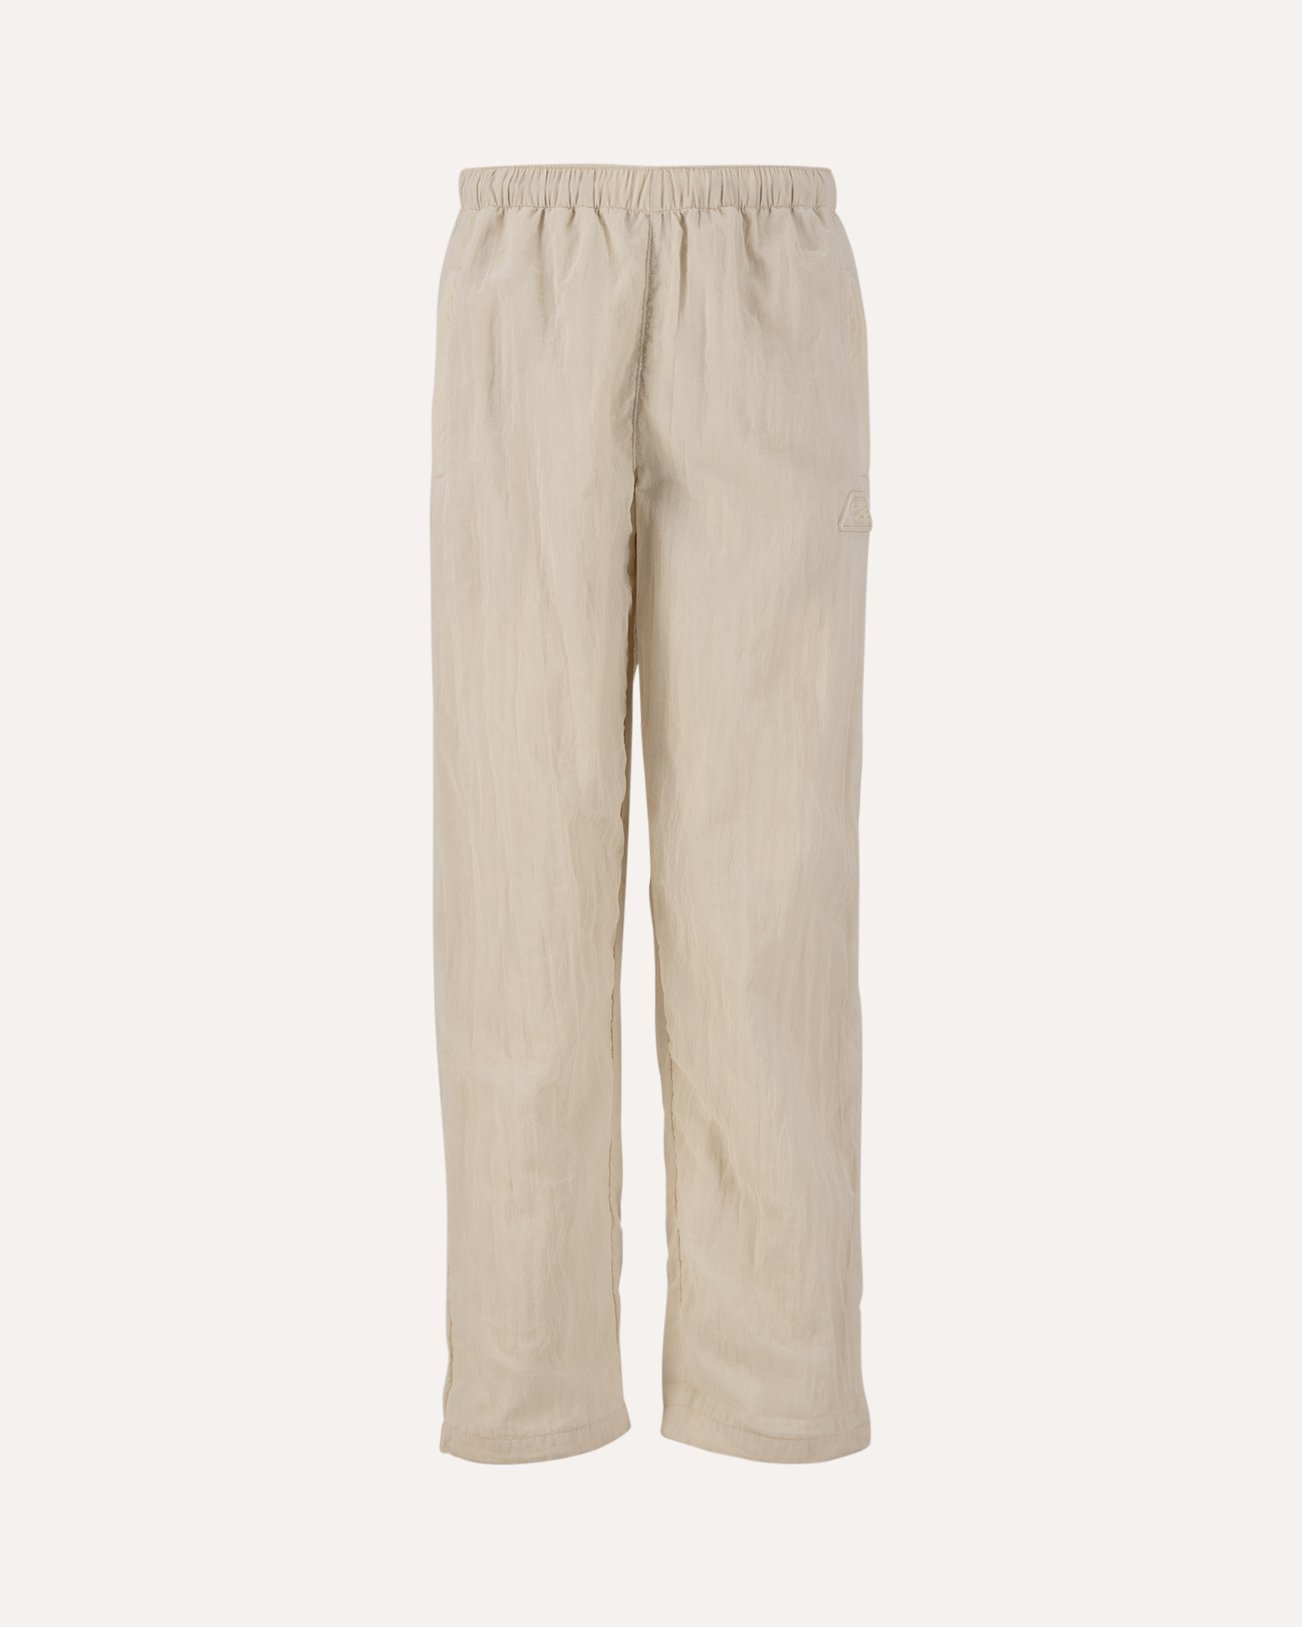 Olaf Hussein Olaf Ripstop Pants White 1